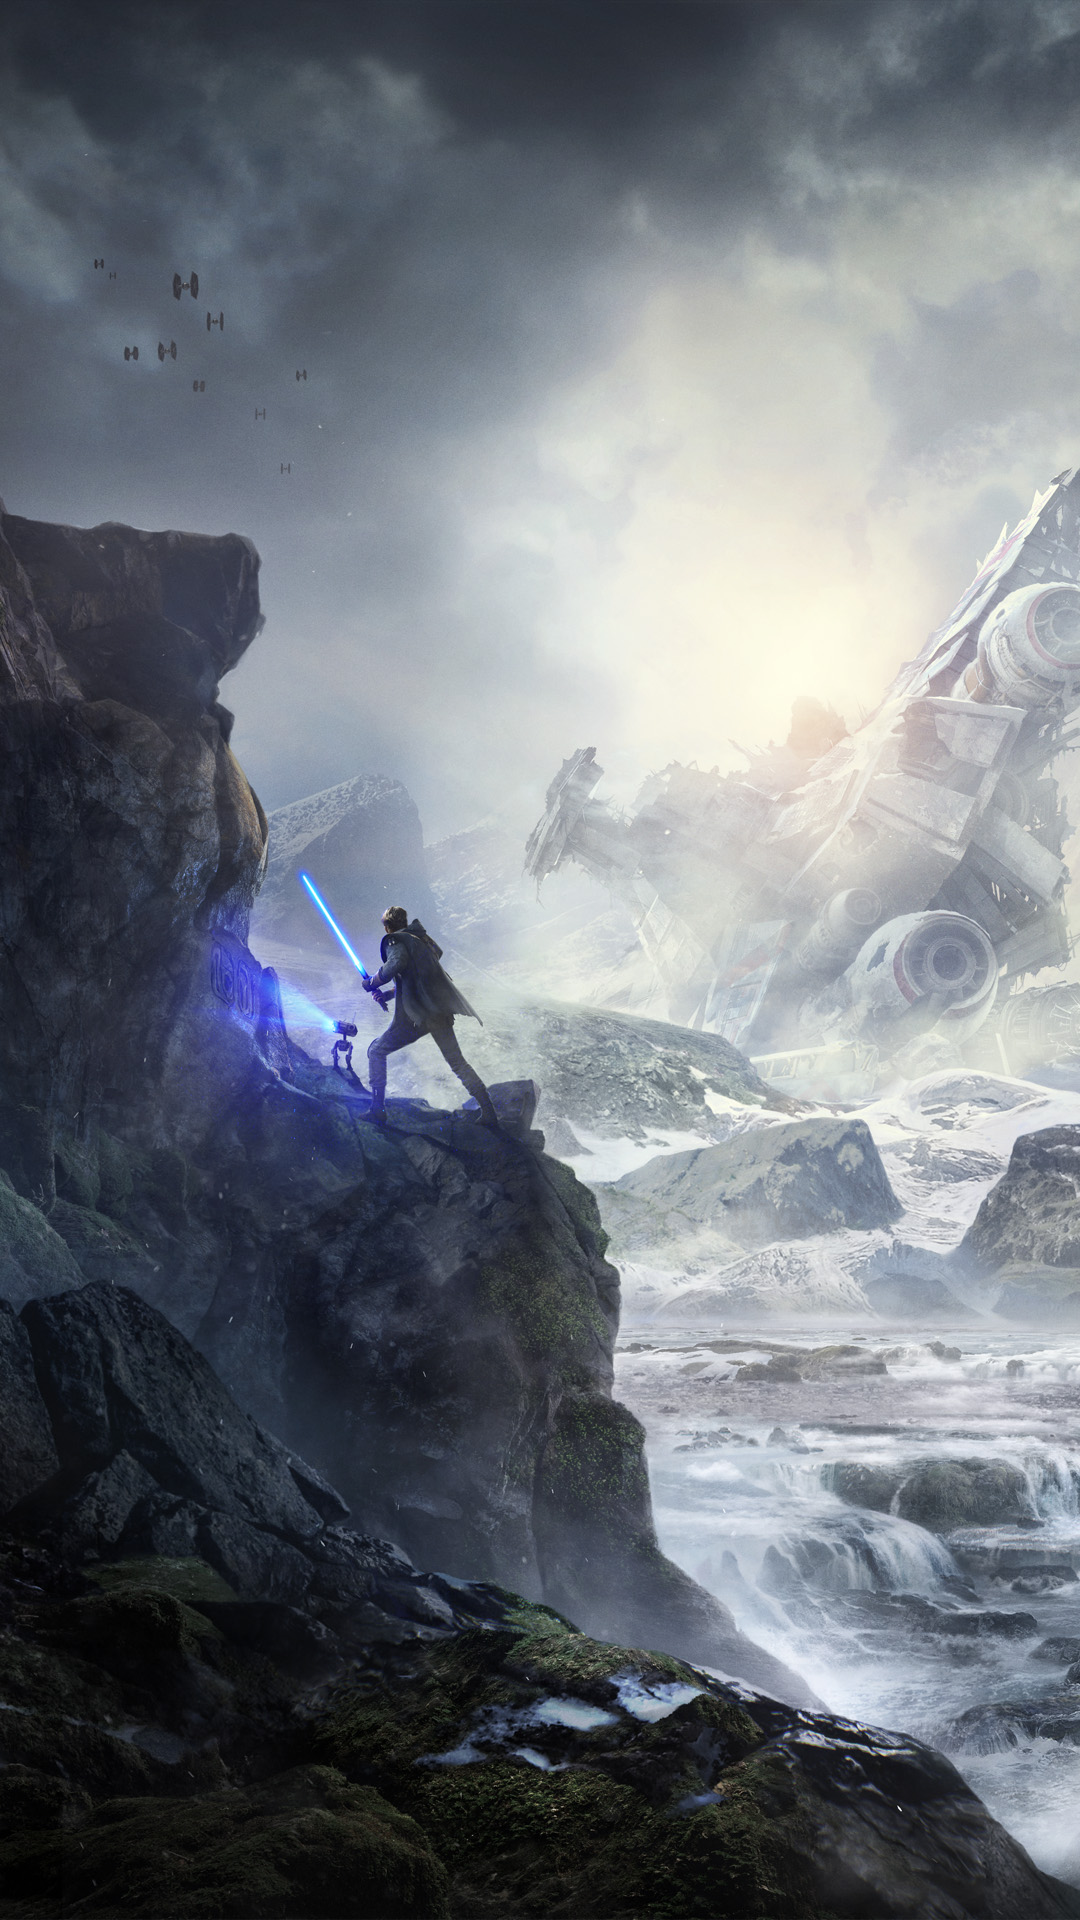 Star Wars Jedi Fallen Order Trailers And Media Ea Official Site